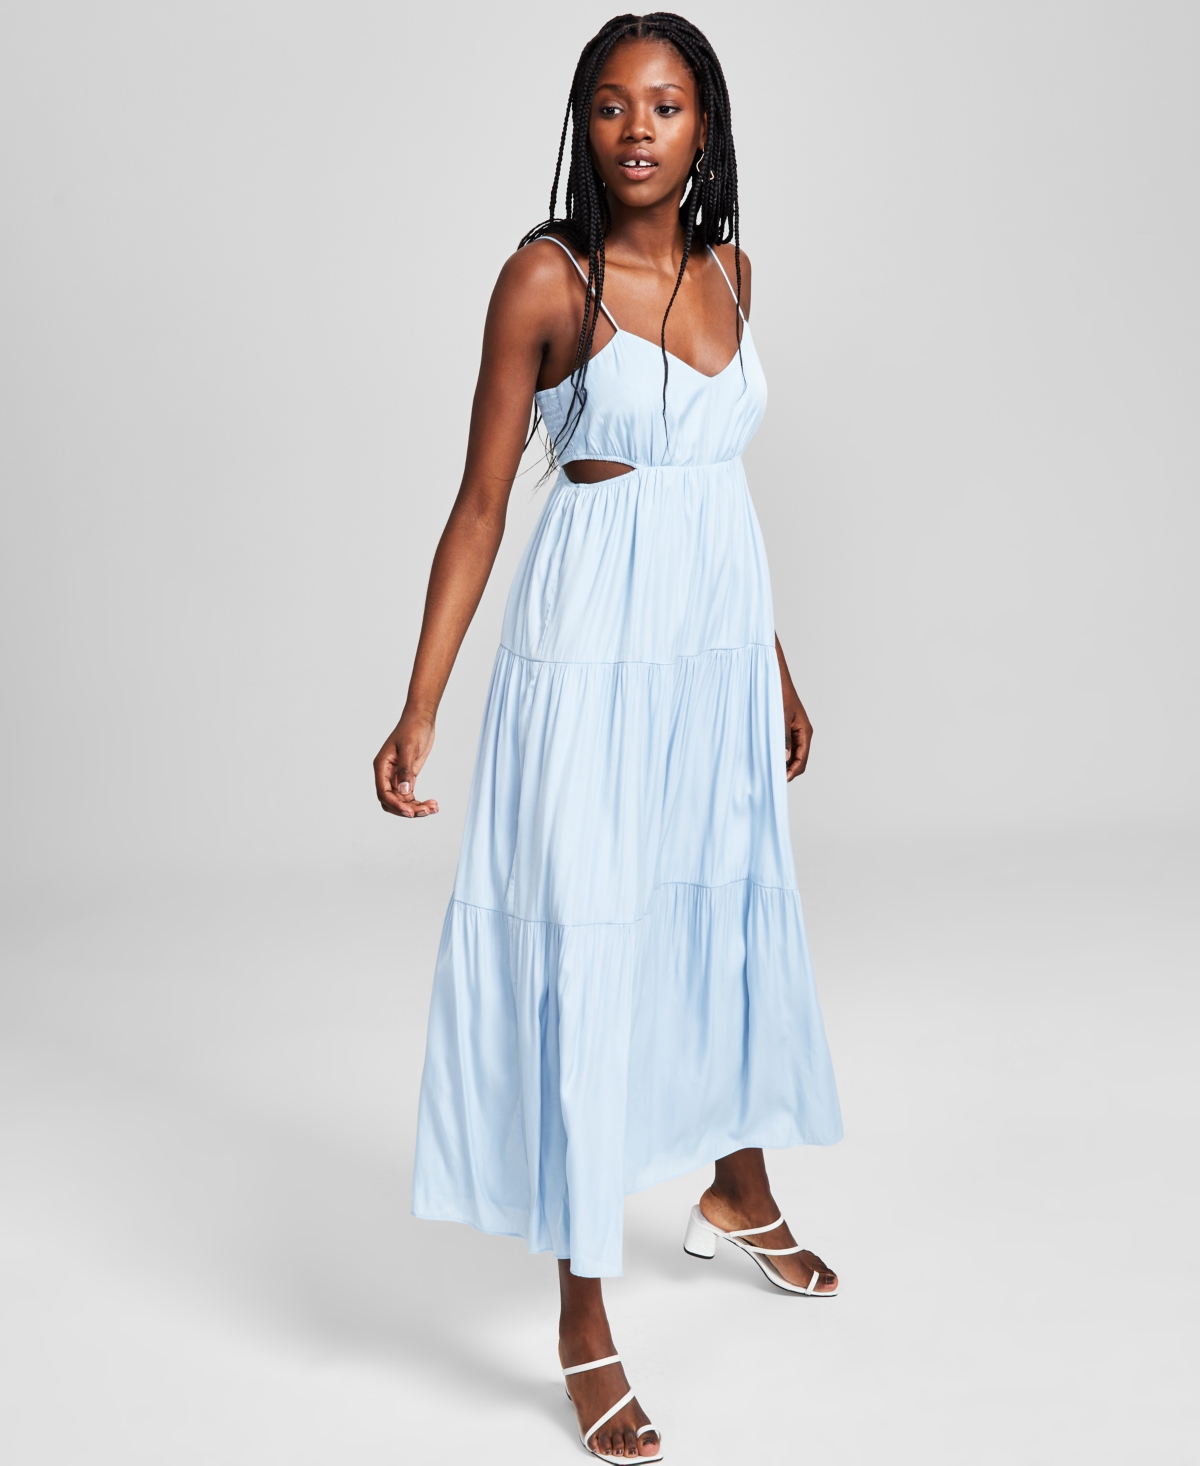 AND NOW THIS WOMEN'S SIDE-CUTOUT TIERED MAXI DRESS